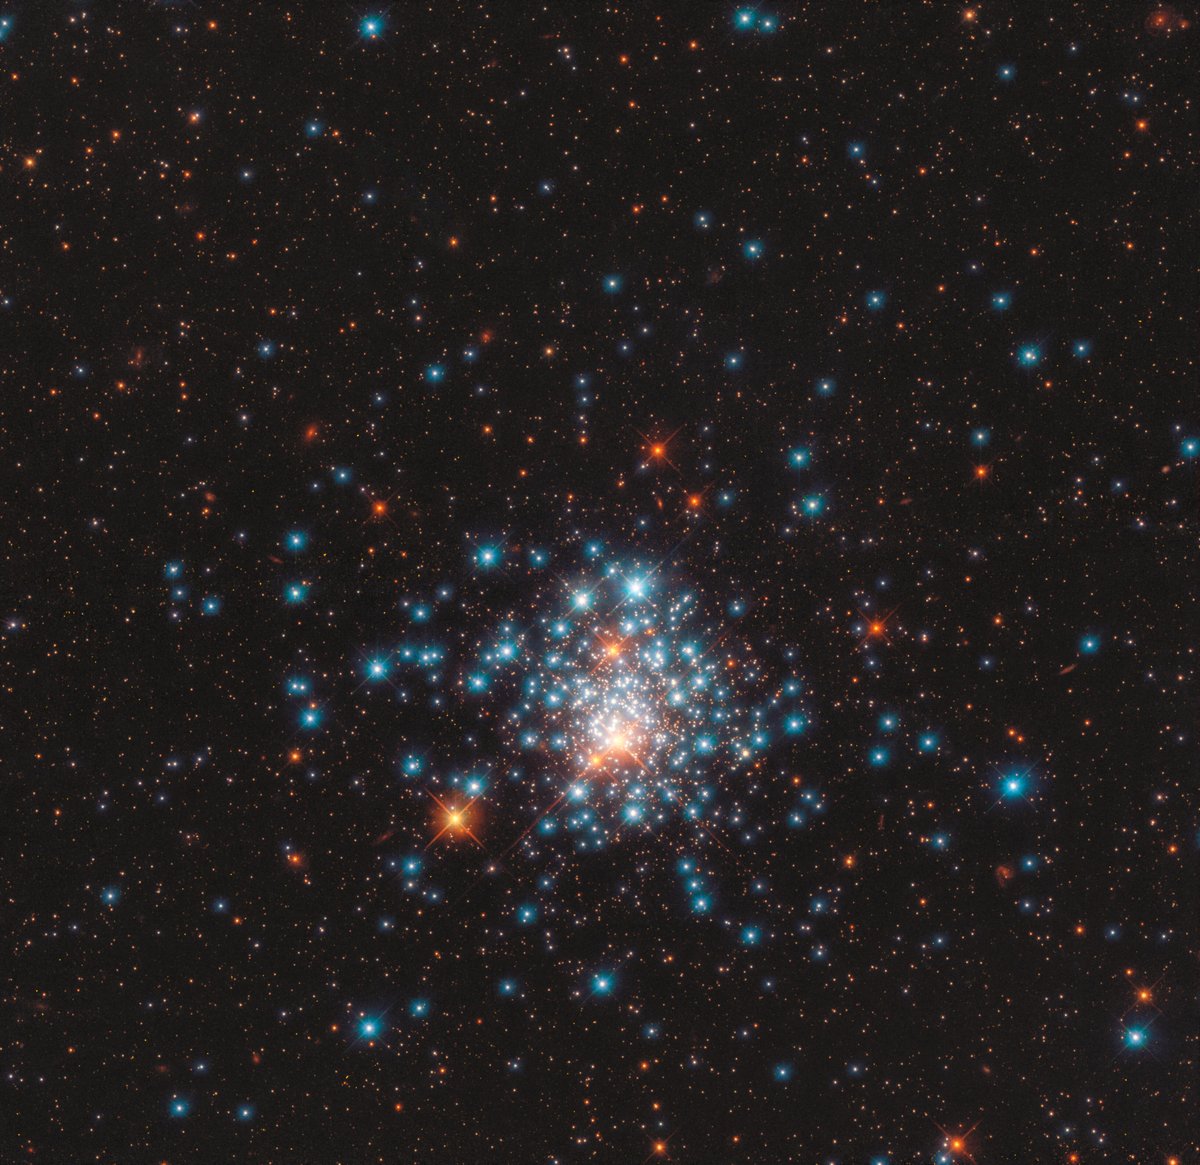 The globular cluster NGC 1805, out on the fringes of the Large Magellanic Cloud. About 160,000 light years away in the constellation Dorado. Credit: ESA/Hubble & NASA, J. Kalirai